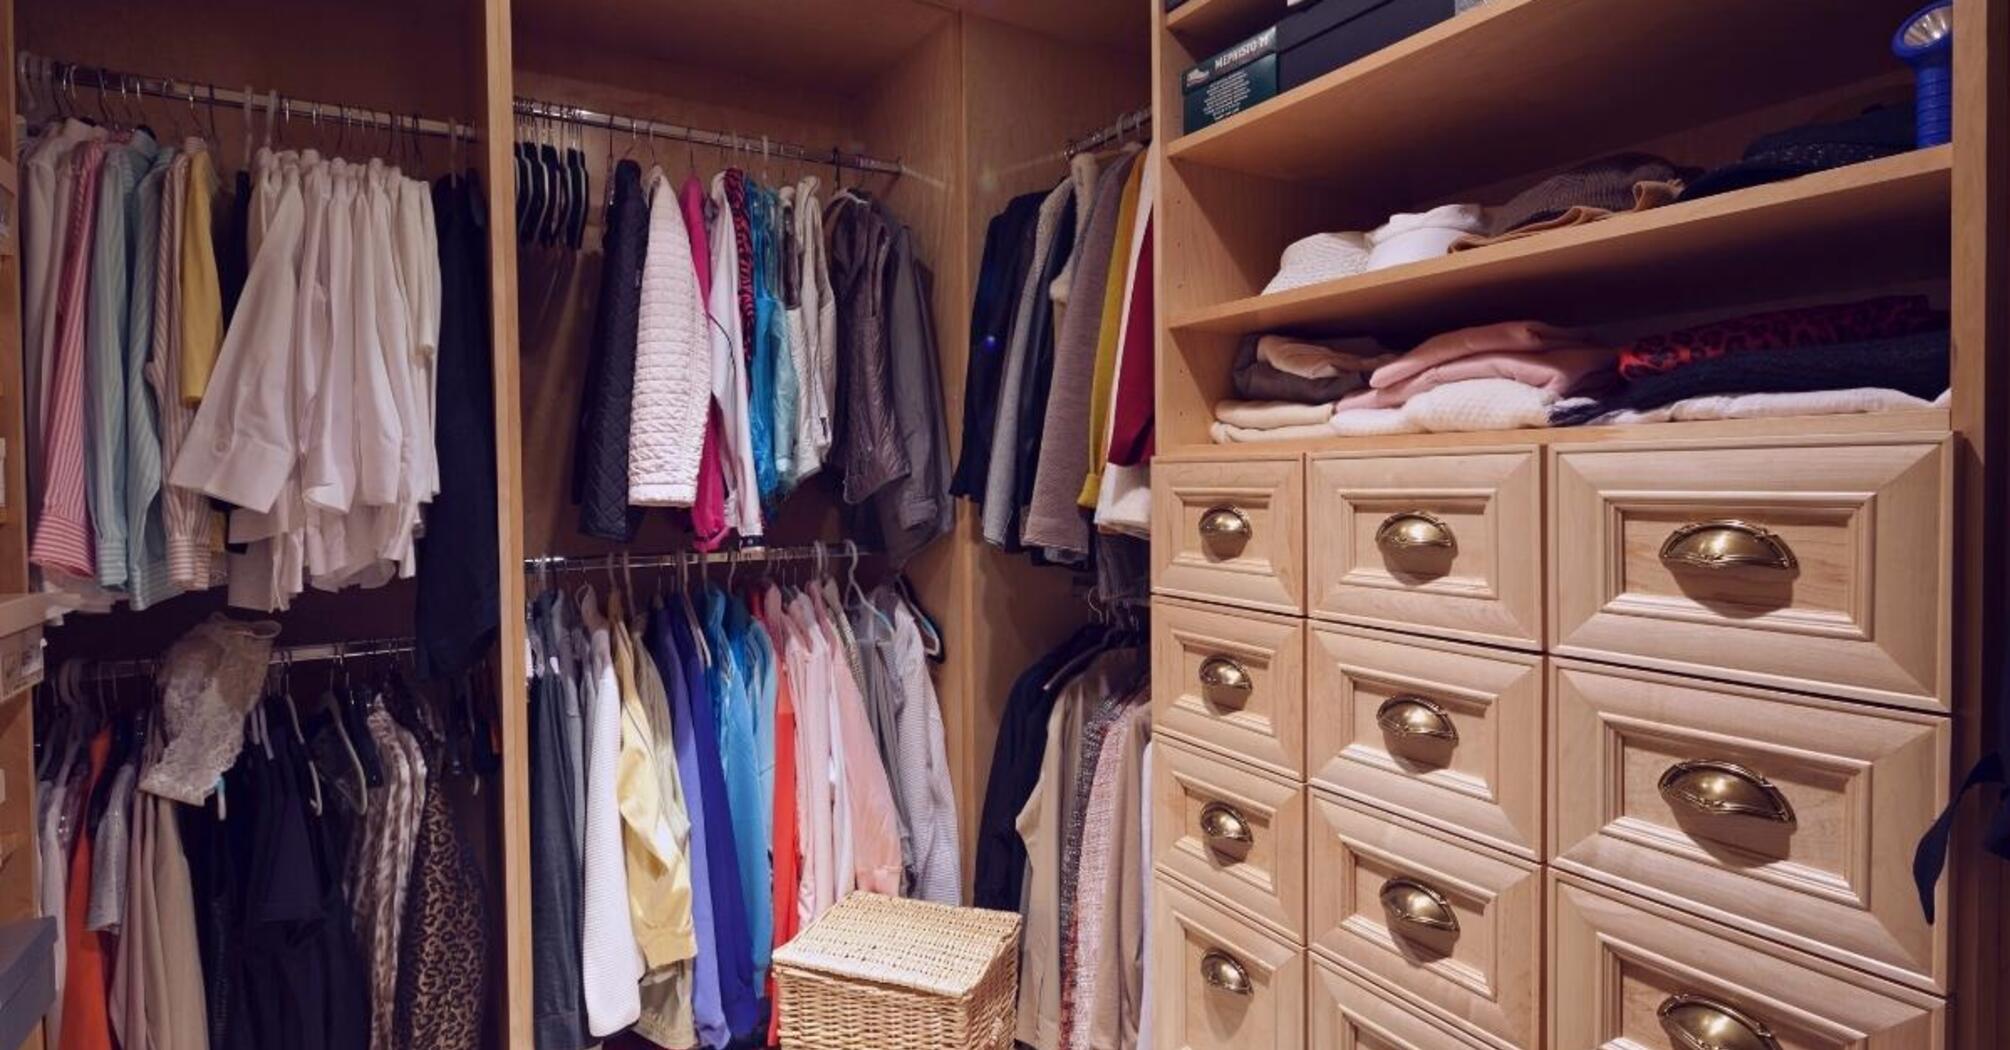 How to get rid of an unpleasant odor in the closet